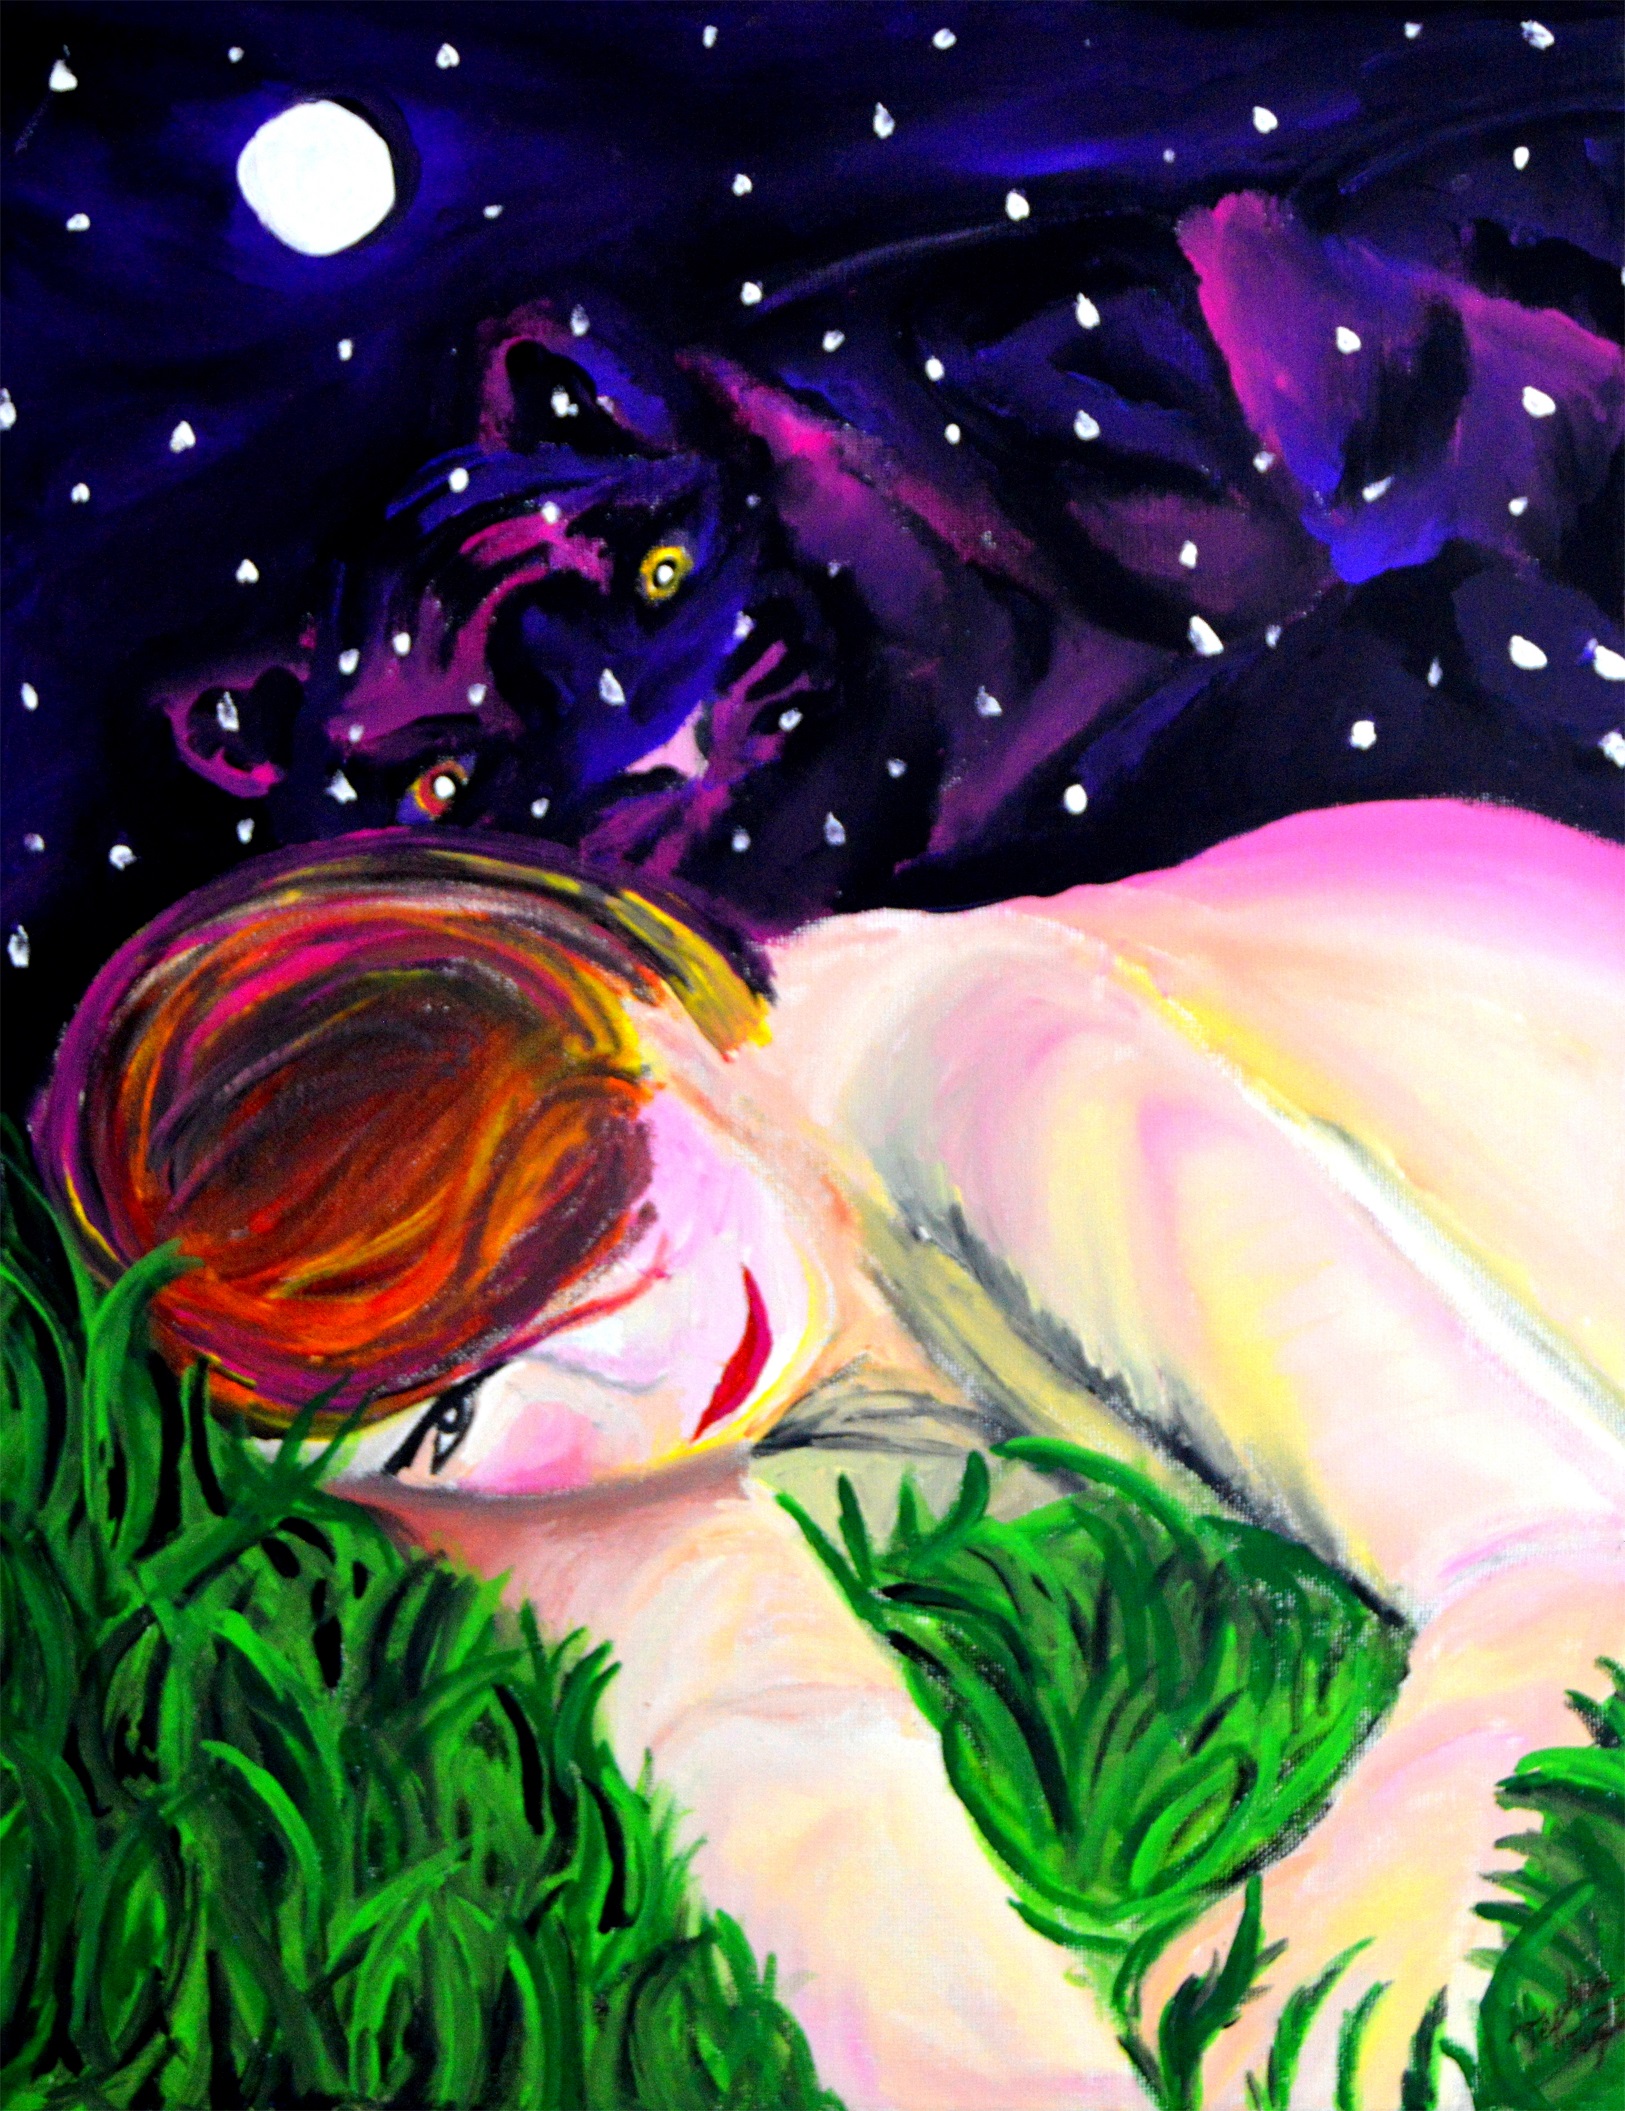 Nightscape of a woman lying naked in the grass underneath the stars with a tiger in the clouds.